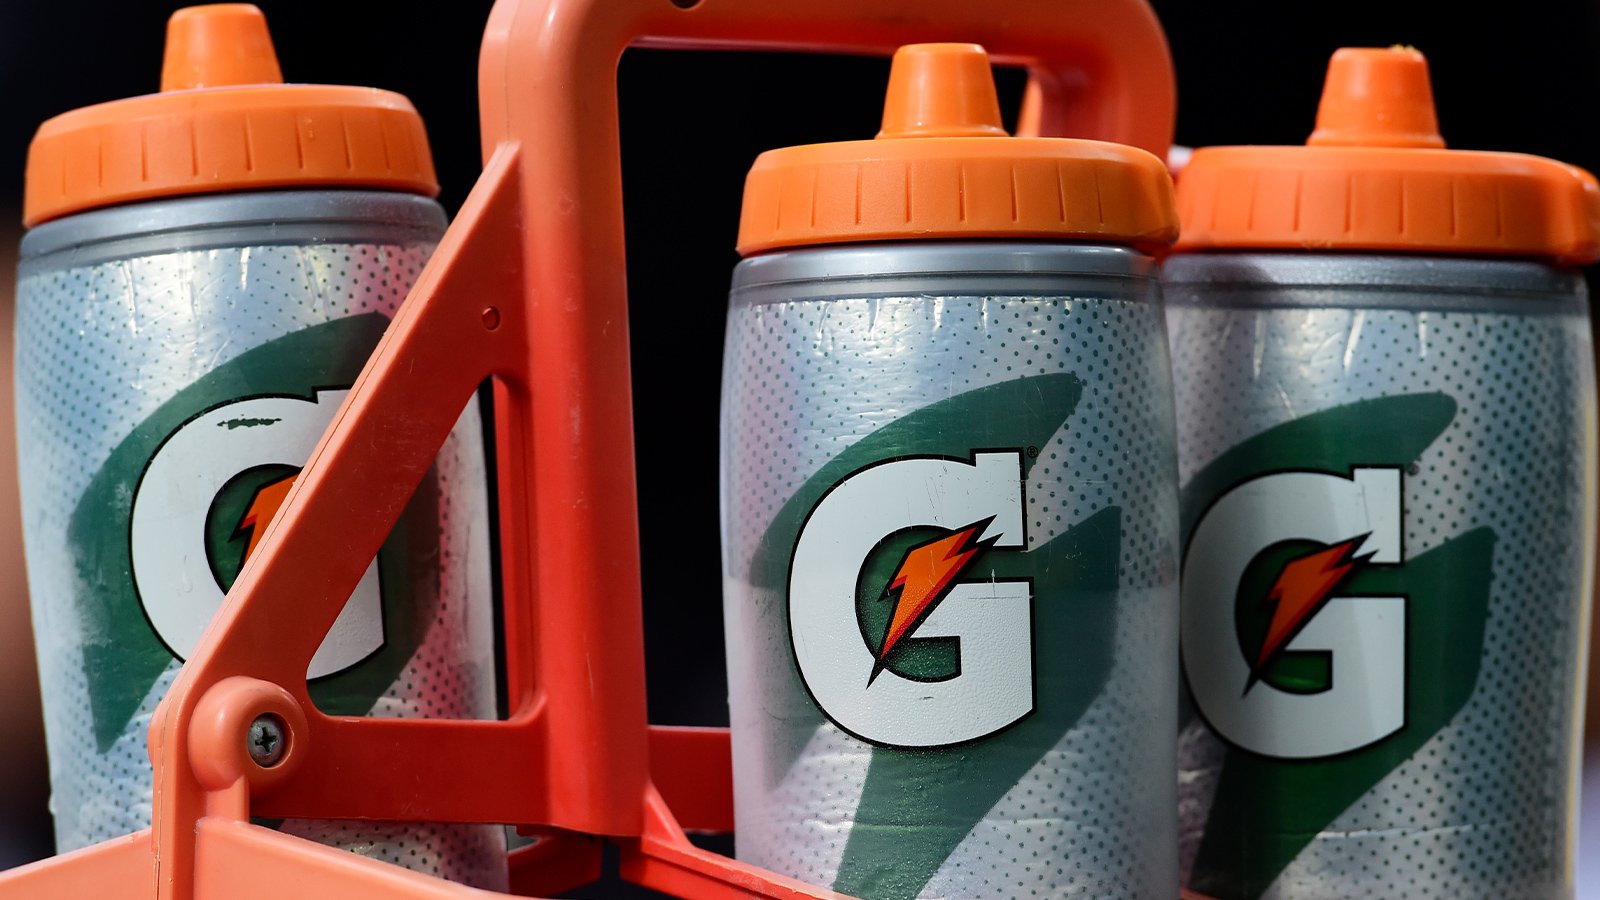 Teen Sprinting Phenom Sues Gatorade For Allegedly Costing Him A Spot In The Olympics Over Positive Doping Test